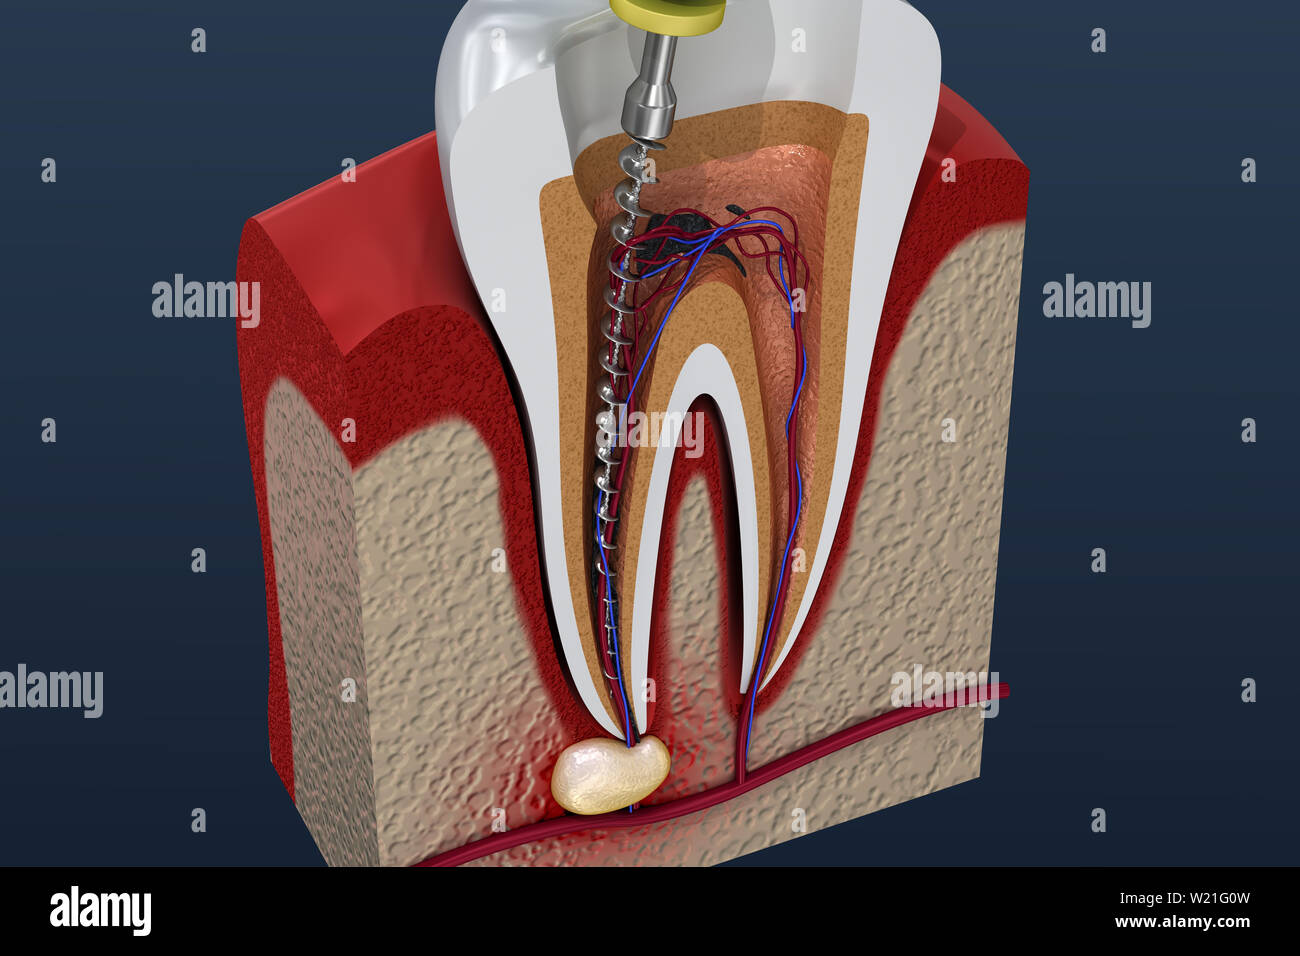 Root canal treatment process. 3D illustration Stock Photo